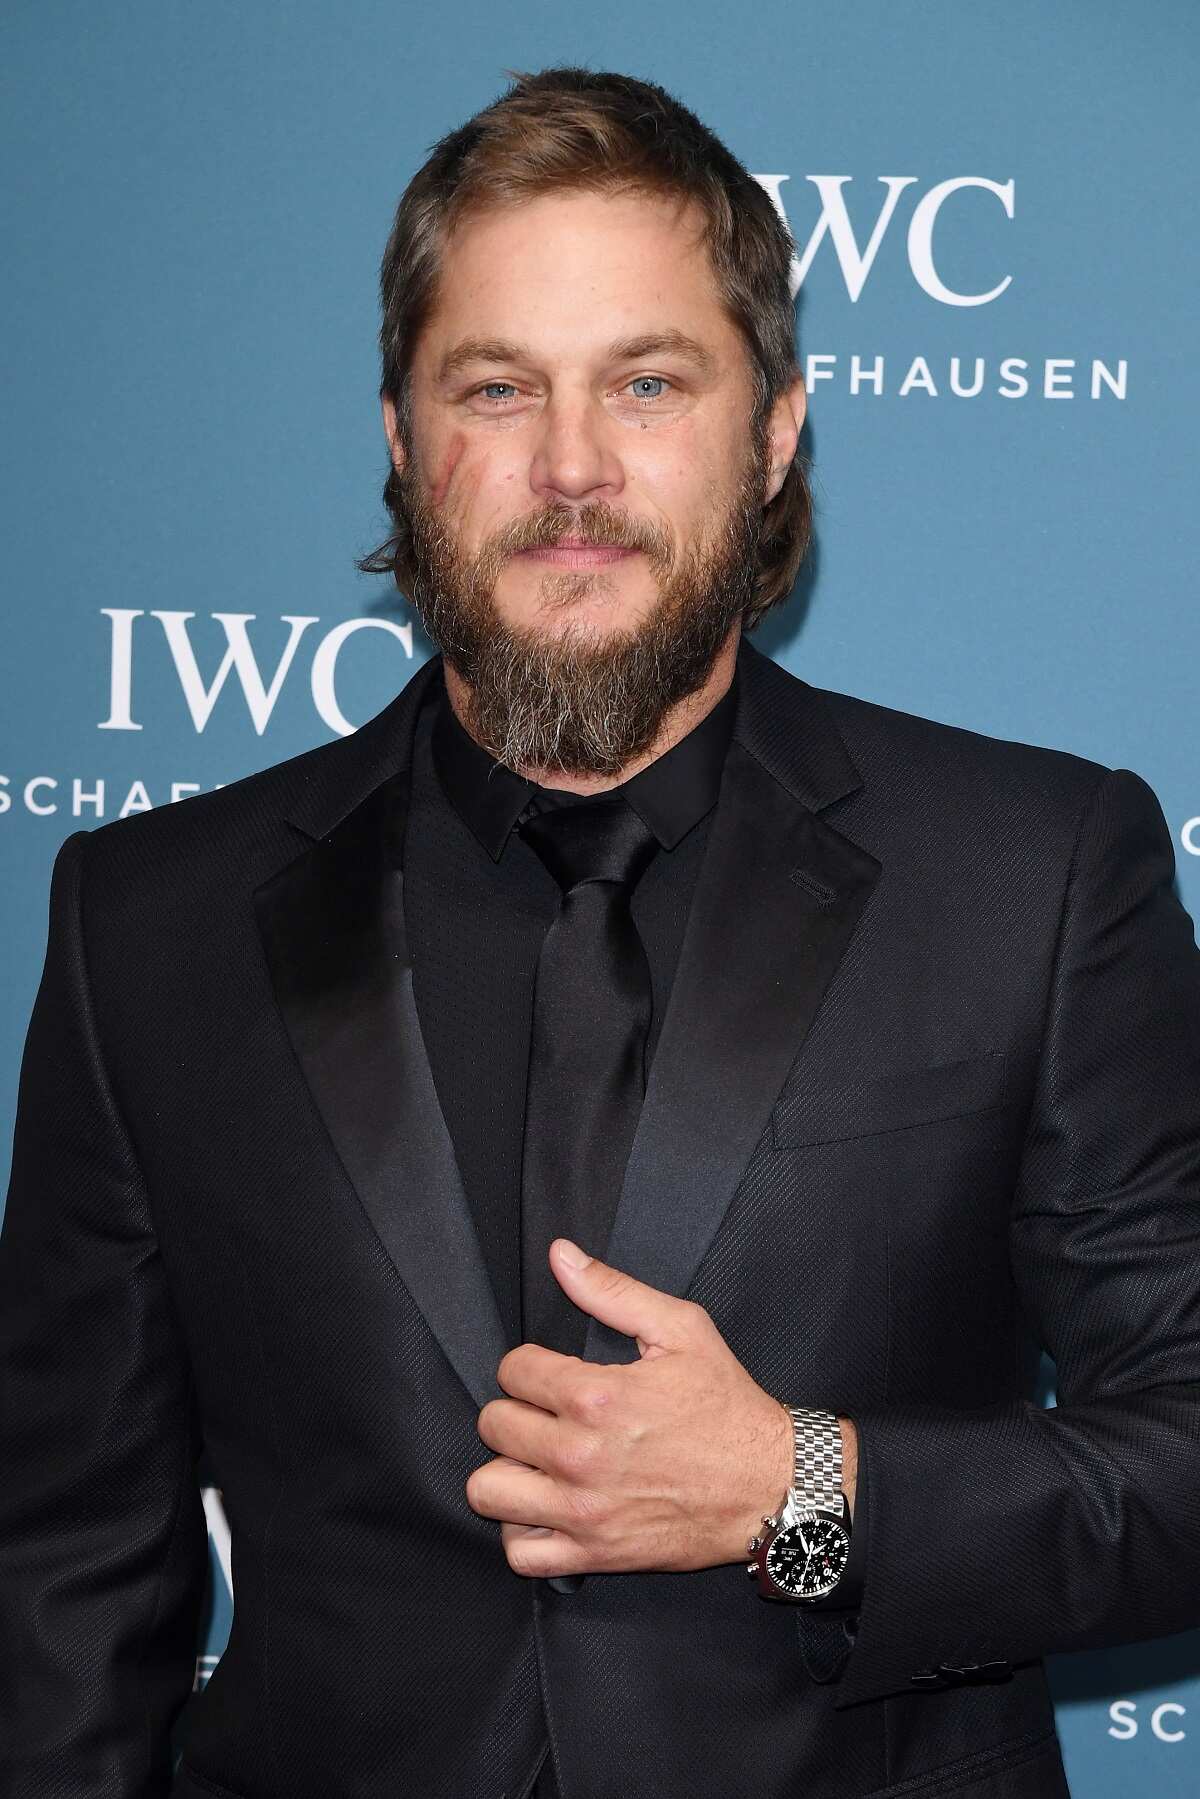 Travis Fimmel biography: Age, height, net worth, is he married?